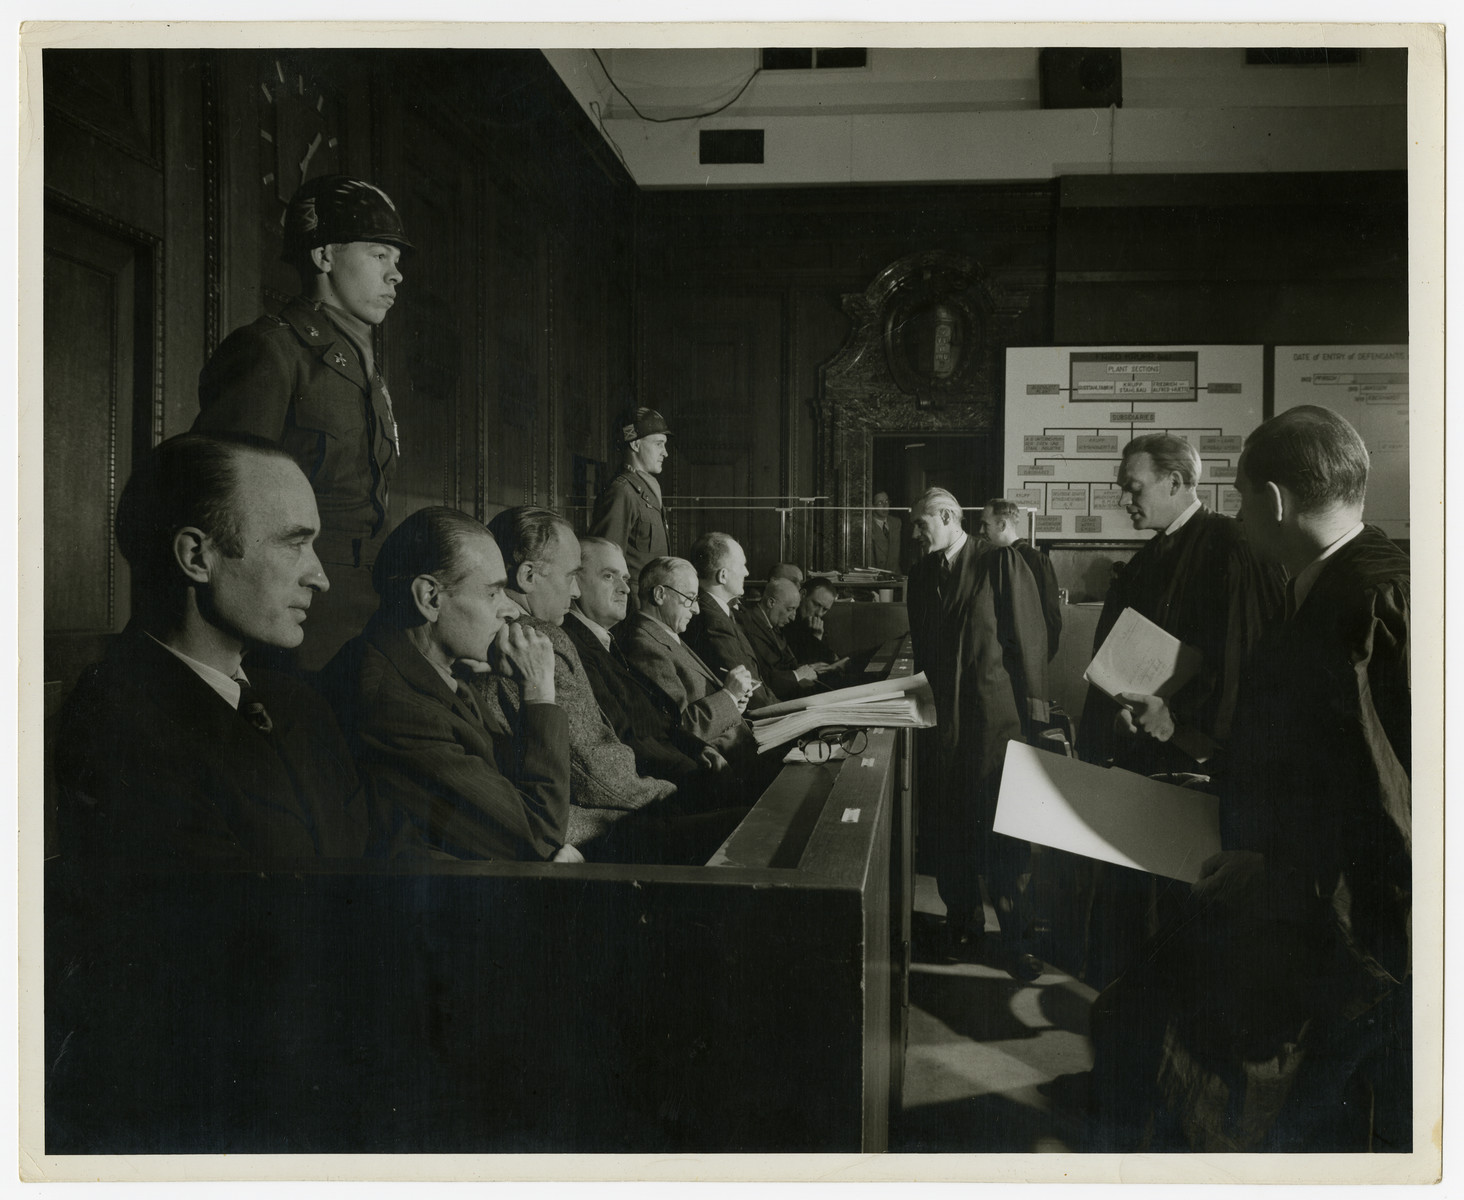 Close-up view of the defendants of the Krupp case.  Behind them are military police.

Seated in the front left is the chief defendant Alfred Krupp von Bohlen.  In the back is a poster showing organizational structures.